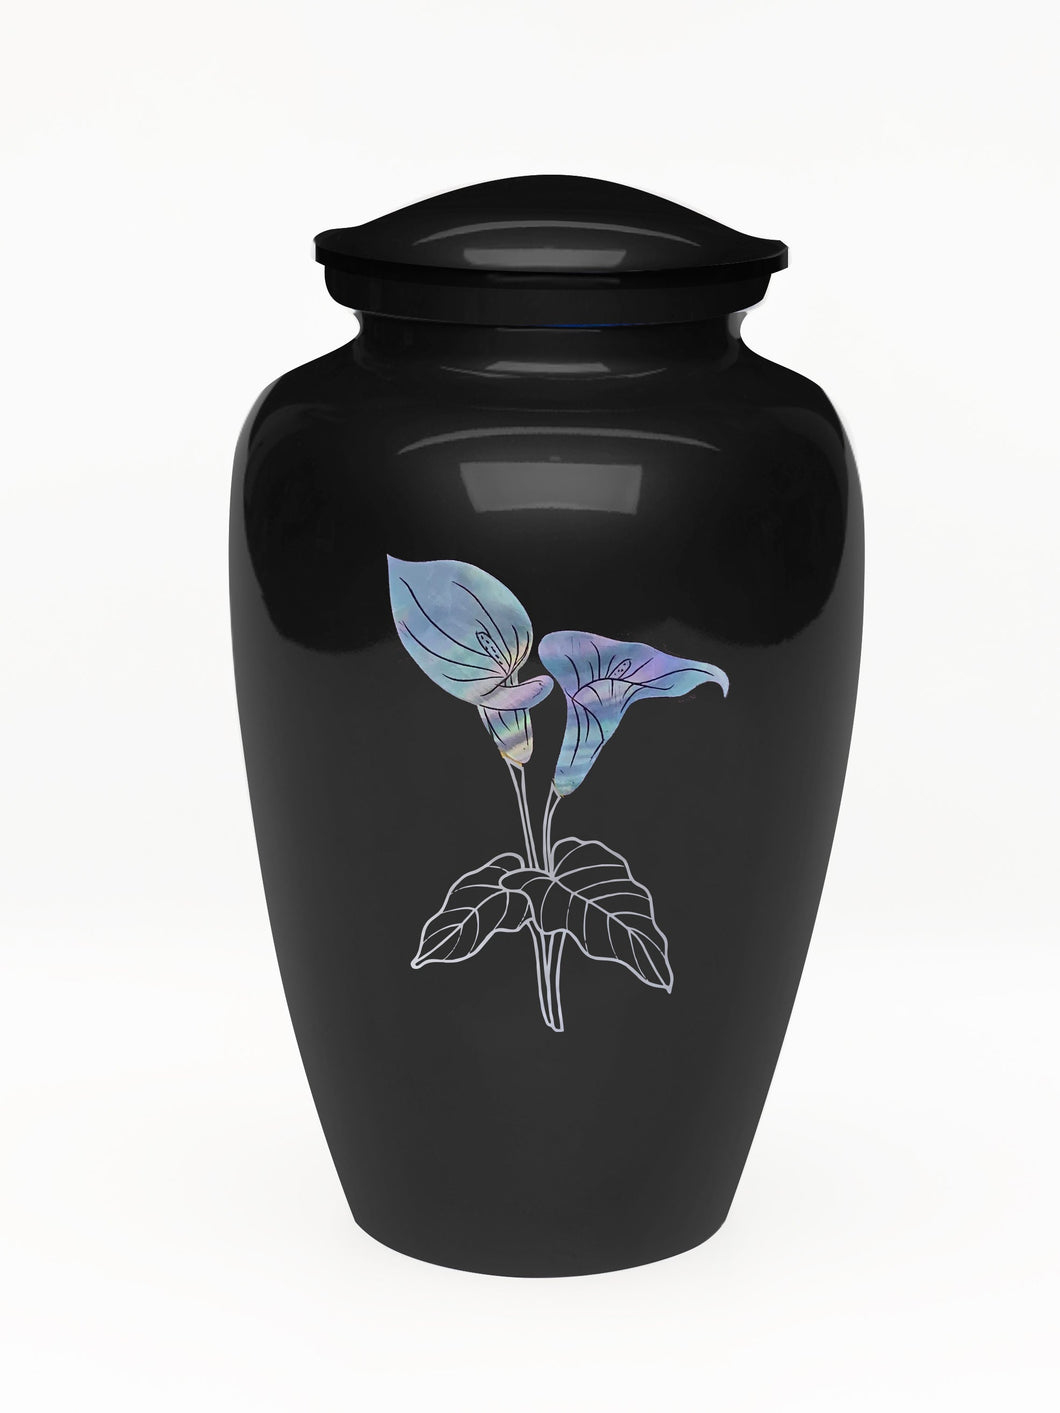 Elegance Series Black Mother Of Pearl Calla Lily Adult Cremation Urn - ExquisiteUrns